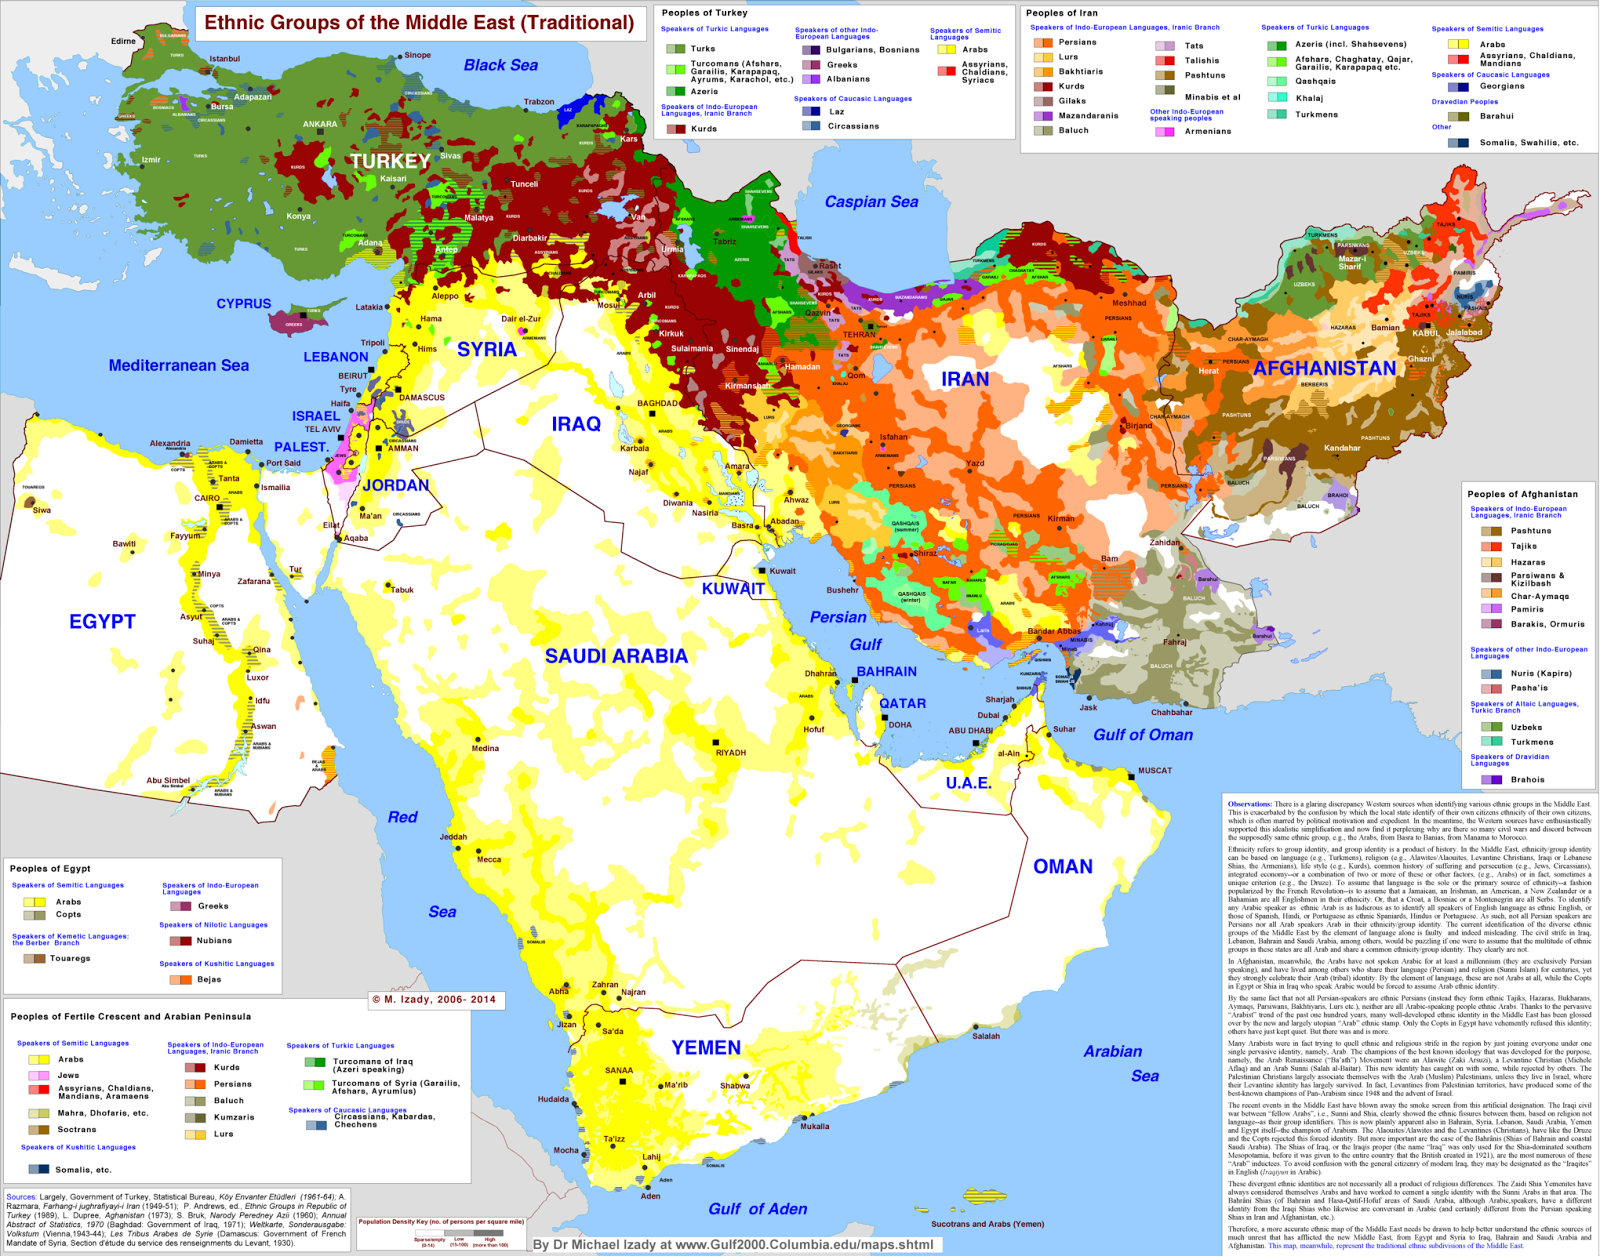 http://www.vox.com/a/maps-explain-the-middle-east